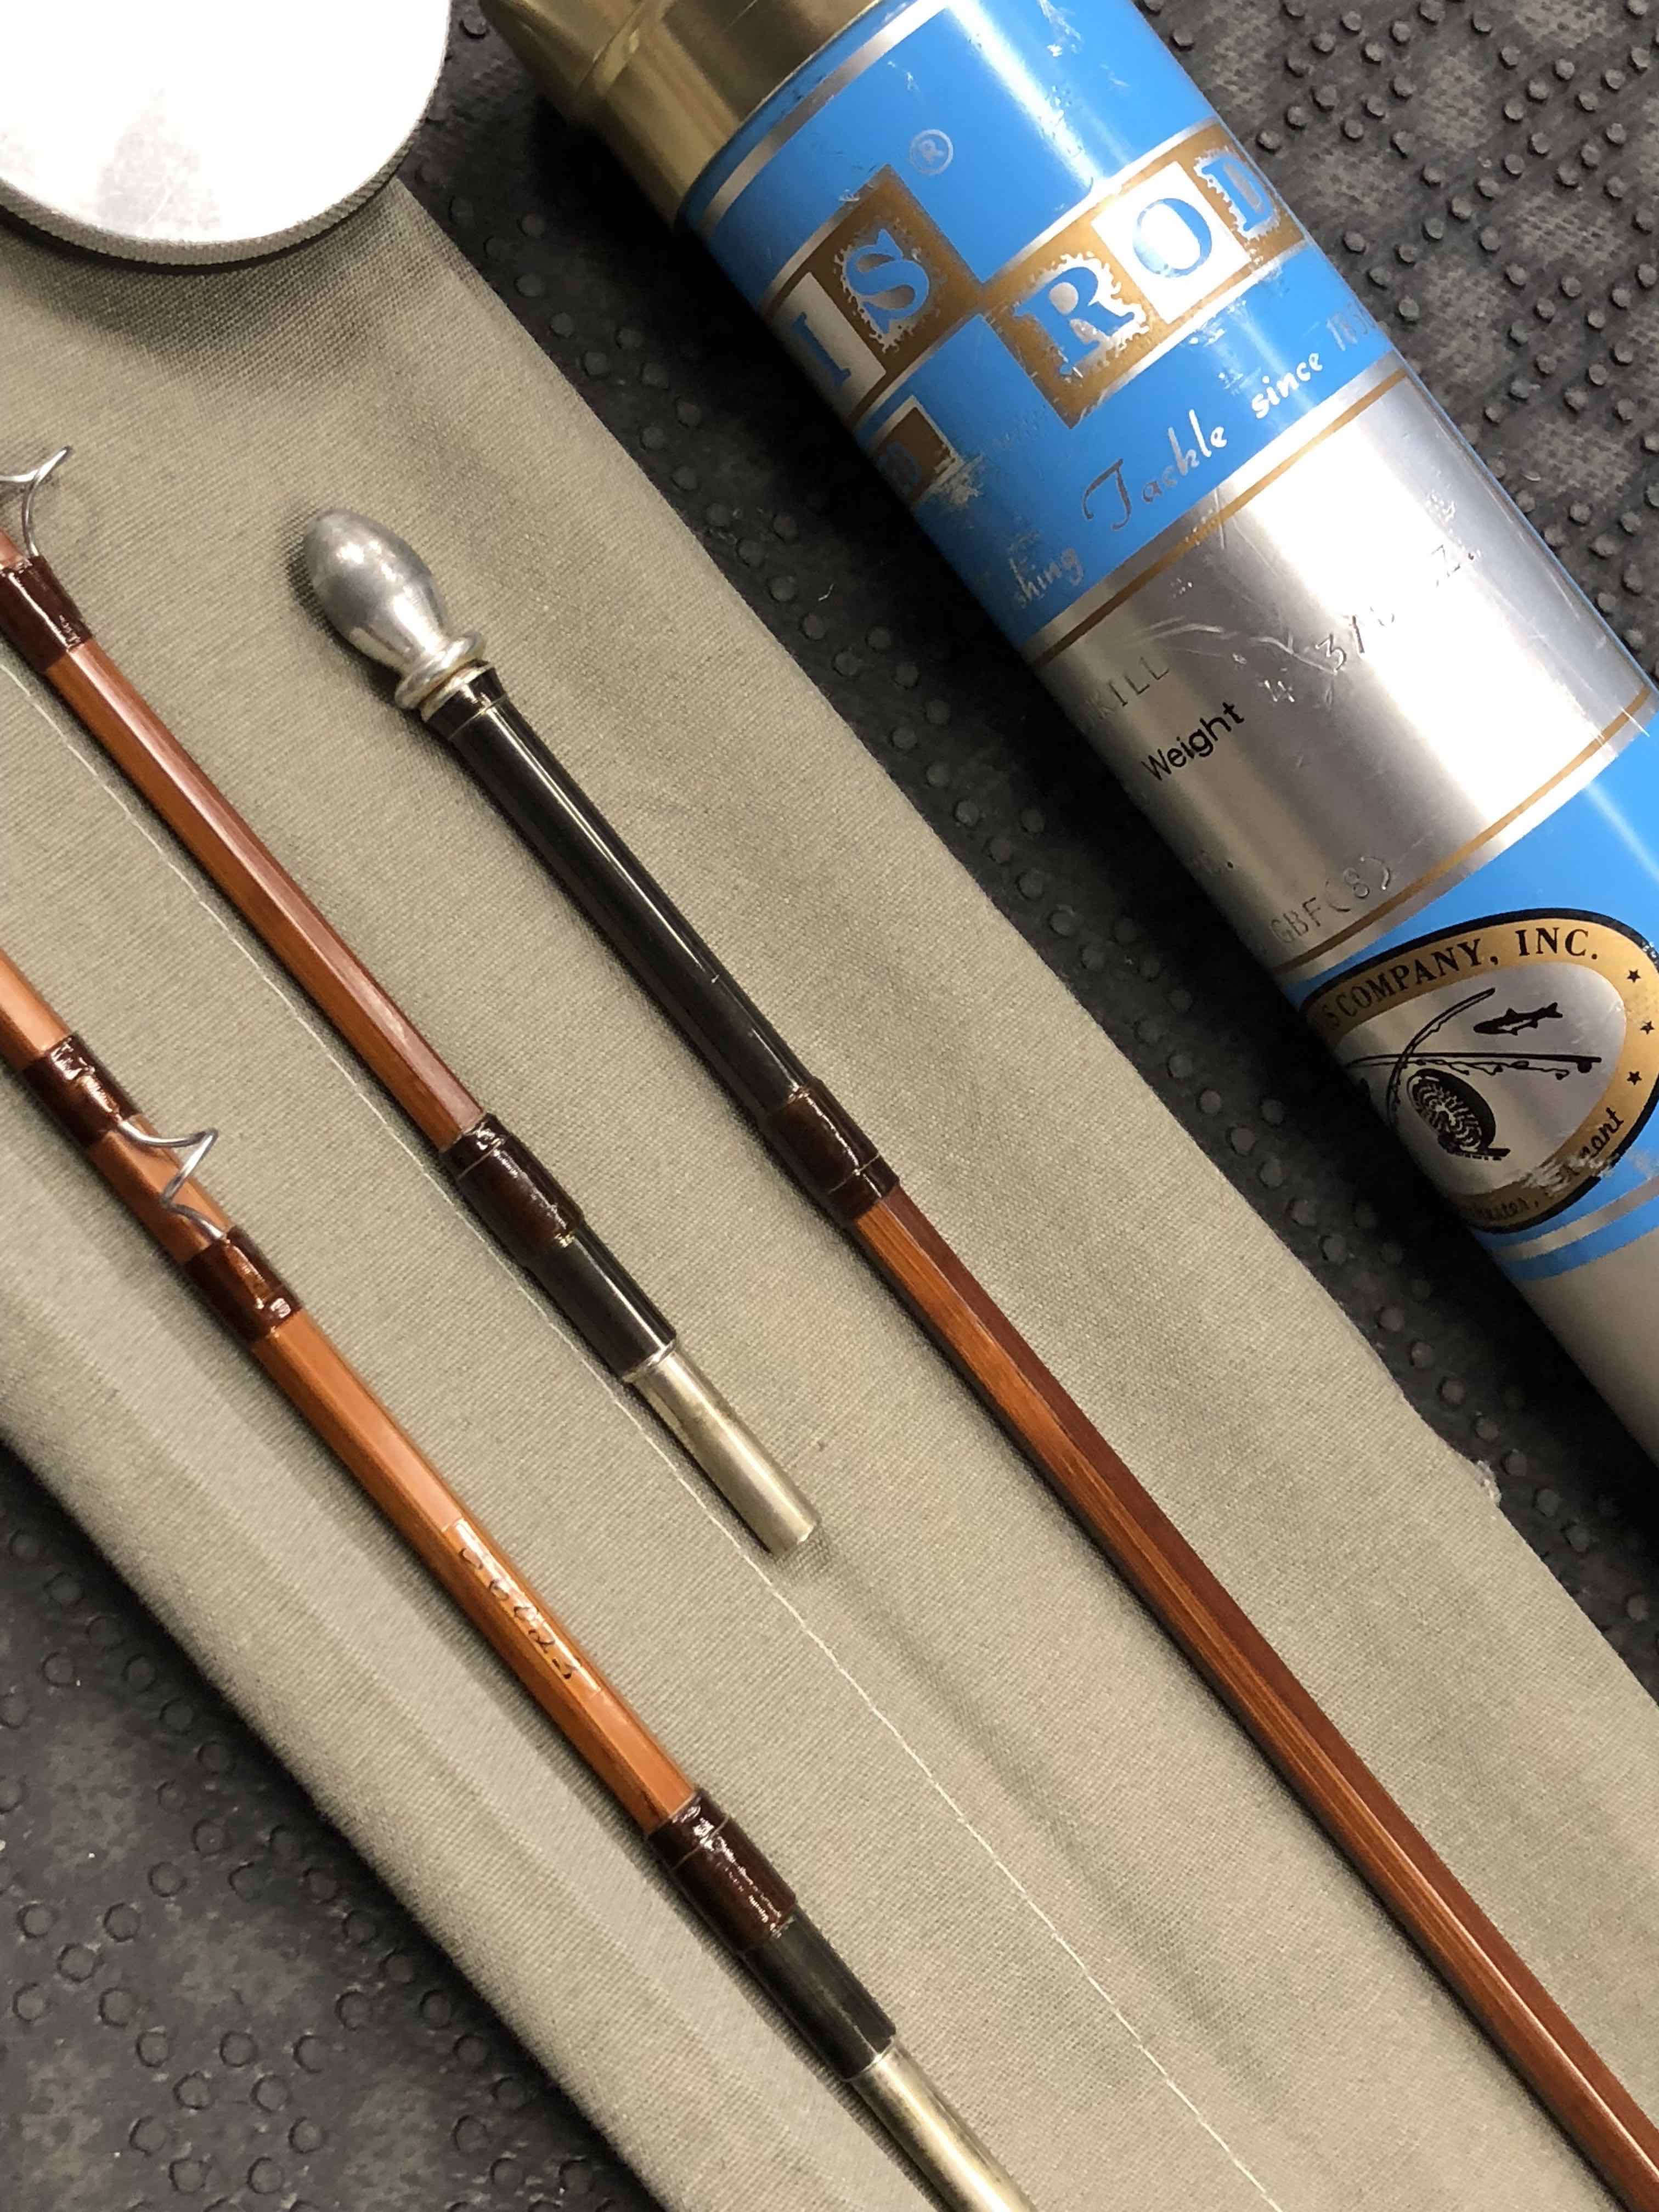 Orvis Battenkill Bamboo Impregnated Cane Fly Rod c/w 2 Tips - 8' 8wt - Original Sock & Tube - MINT CONDITION! - $850